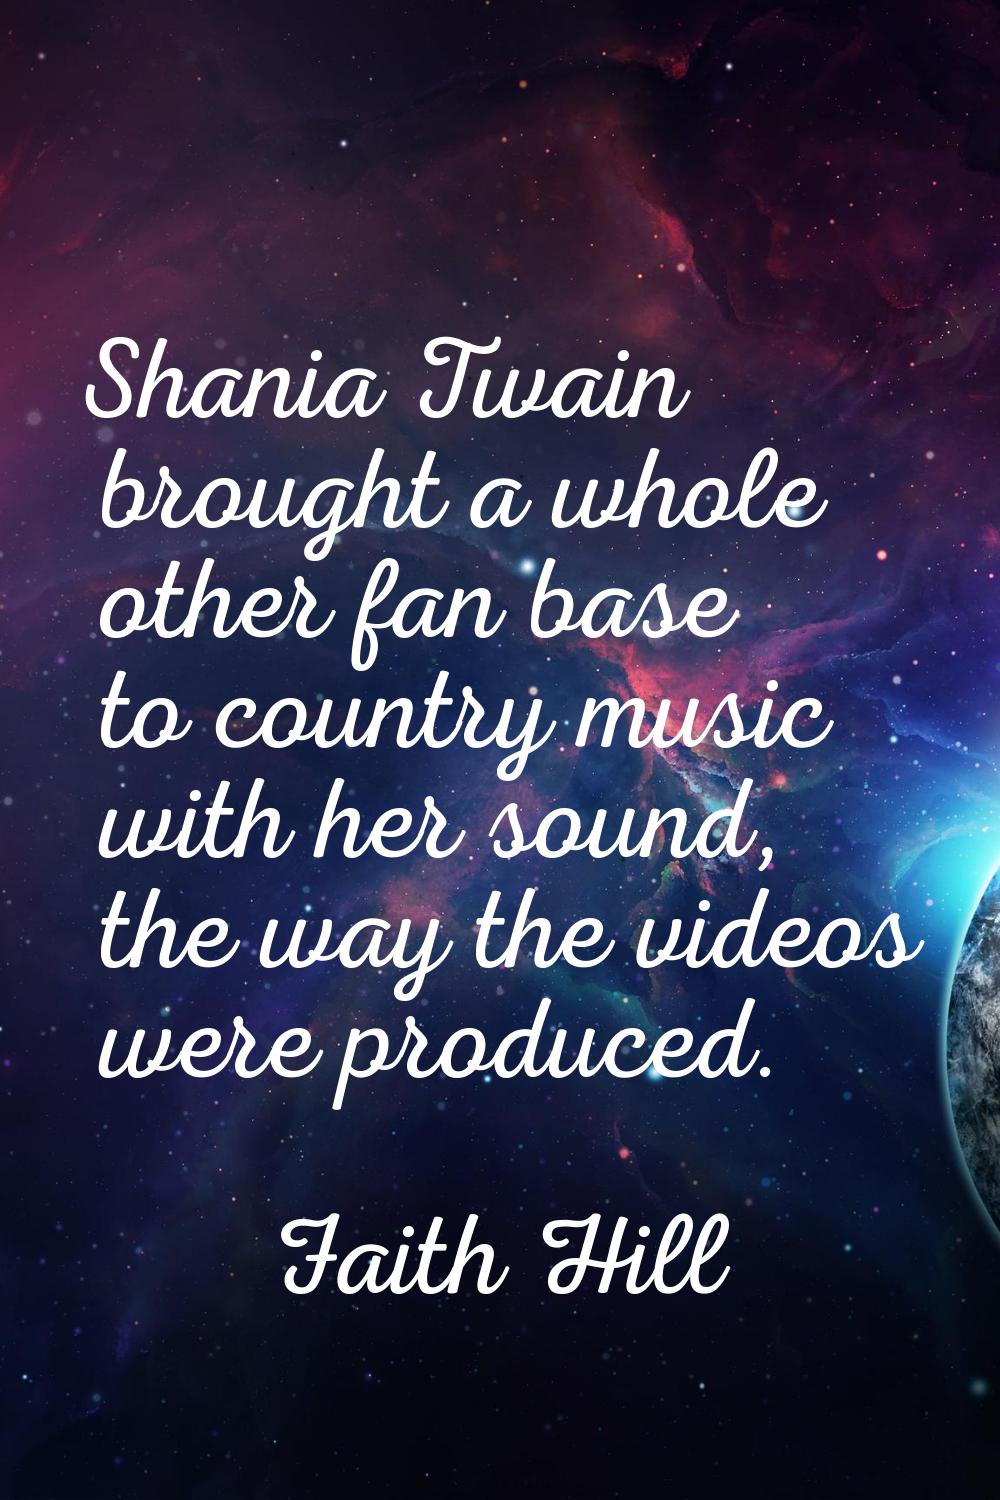 Shania Twain brought a whole other fan base to country music with her sound, the way the videos wer